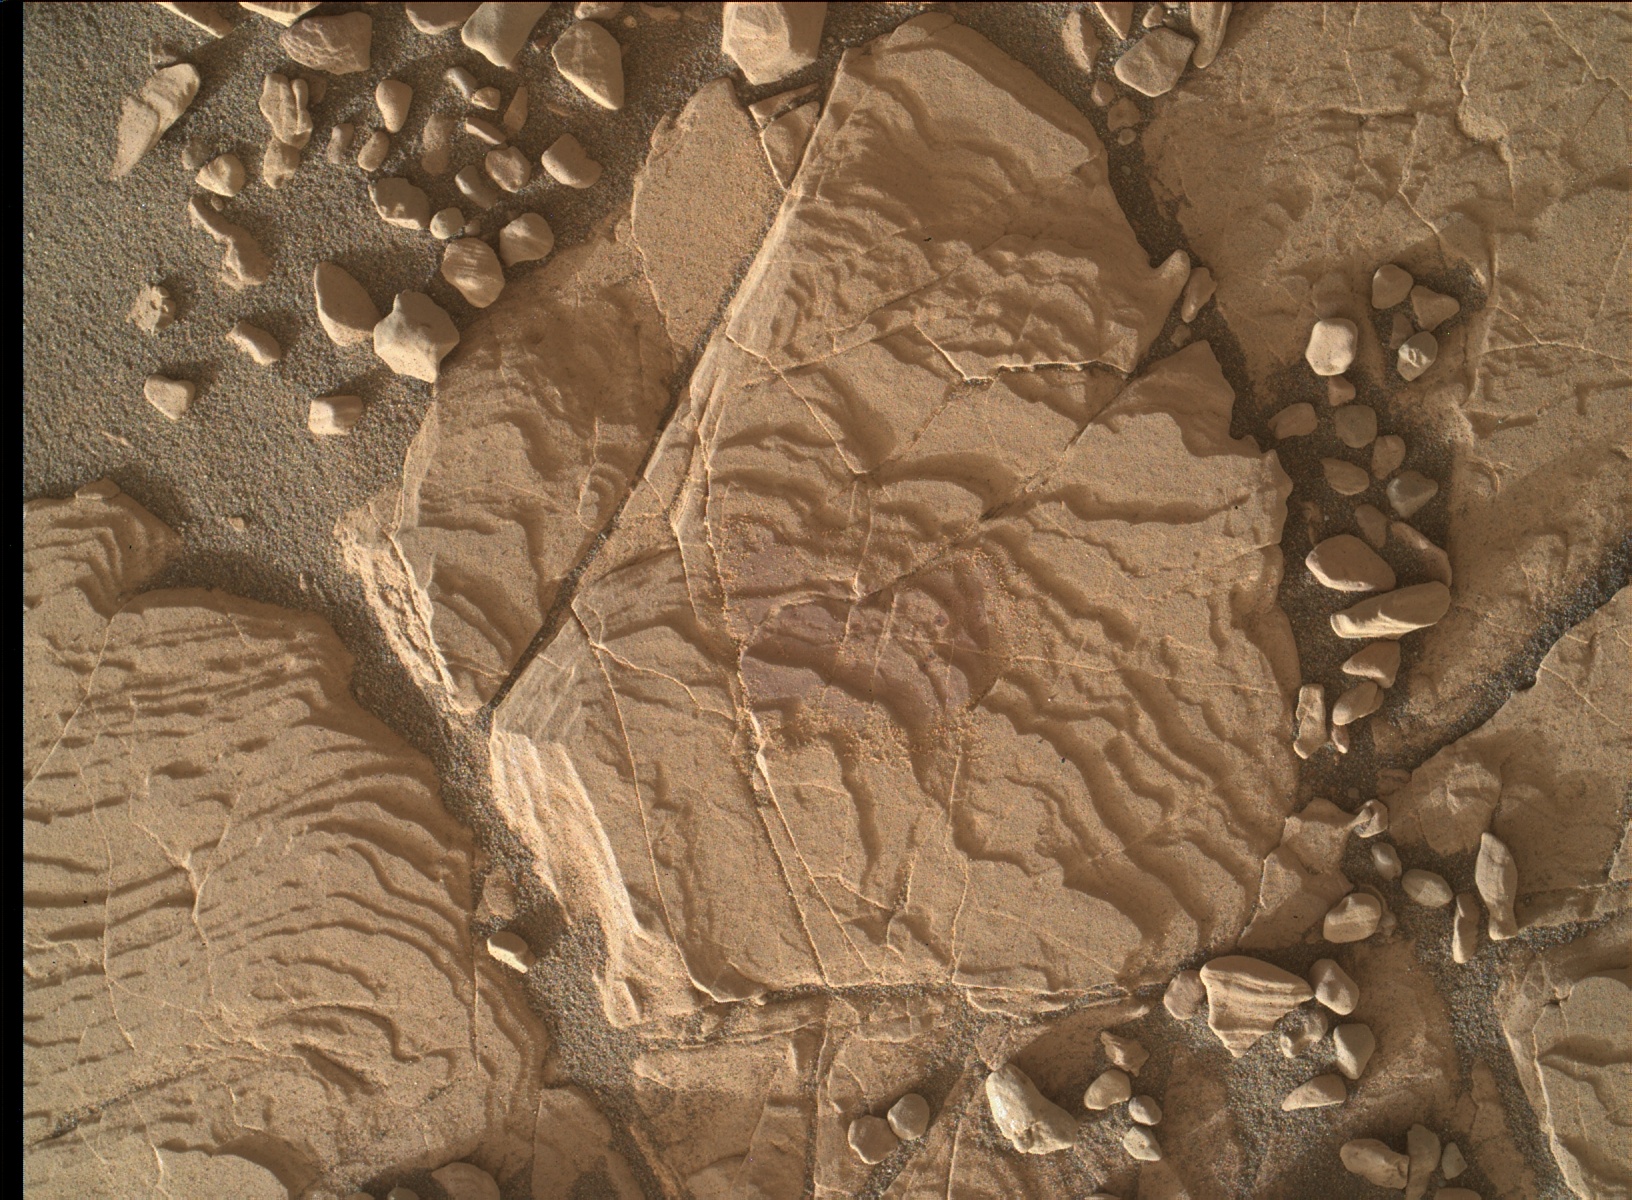 Nasa's Mars rover Curiosity acquired this image using its Mars Hand Lens Imager (MAHLI) on Sol 2038